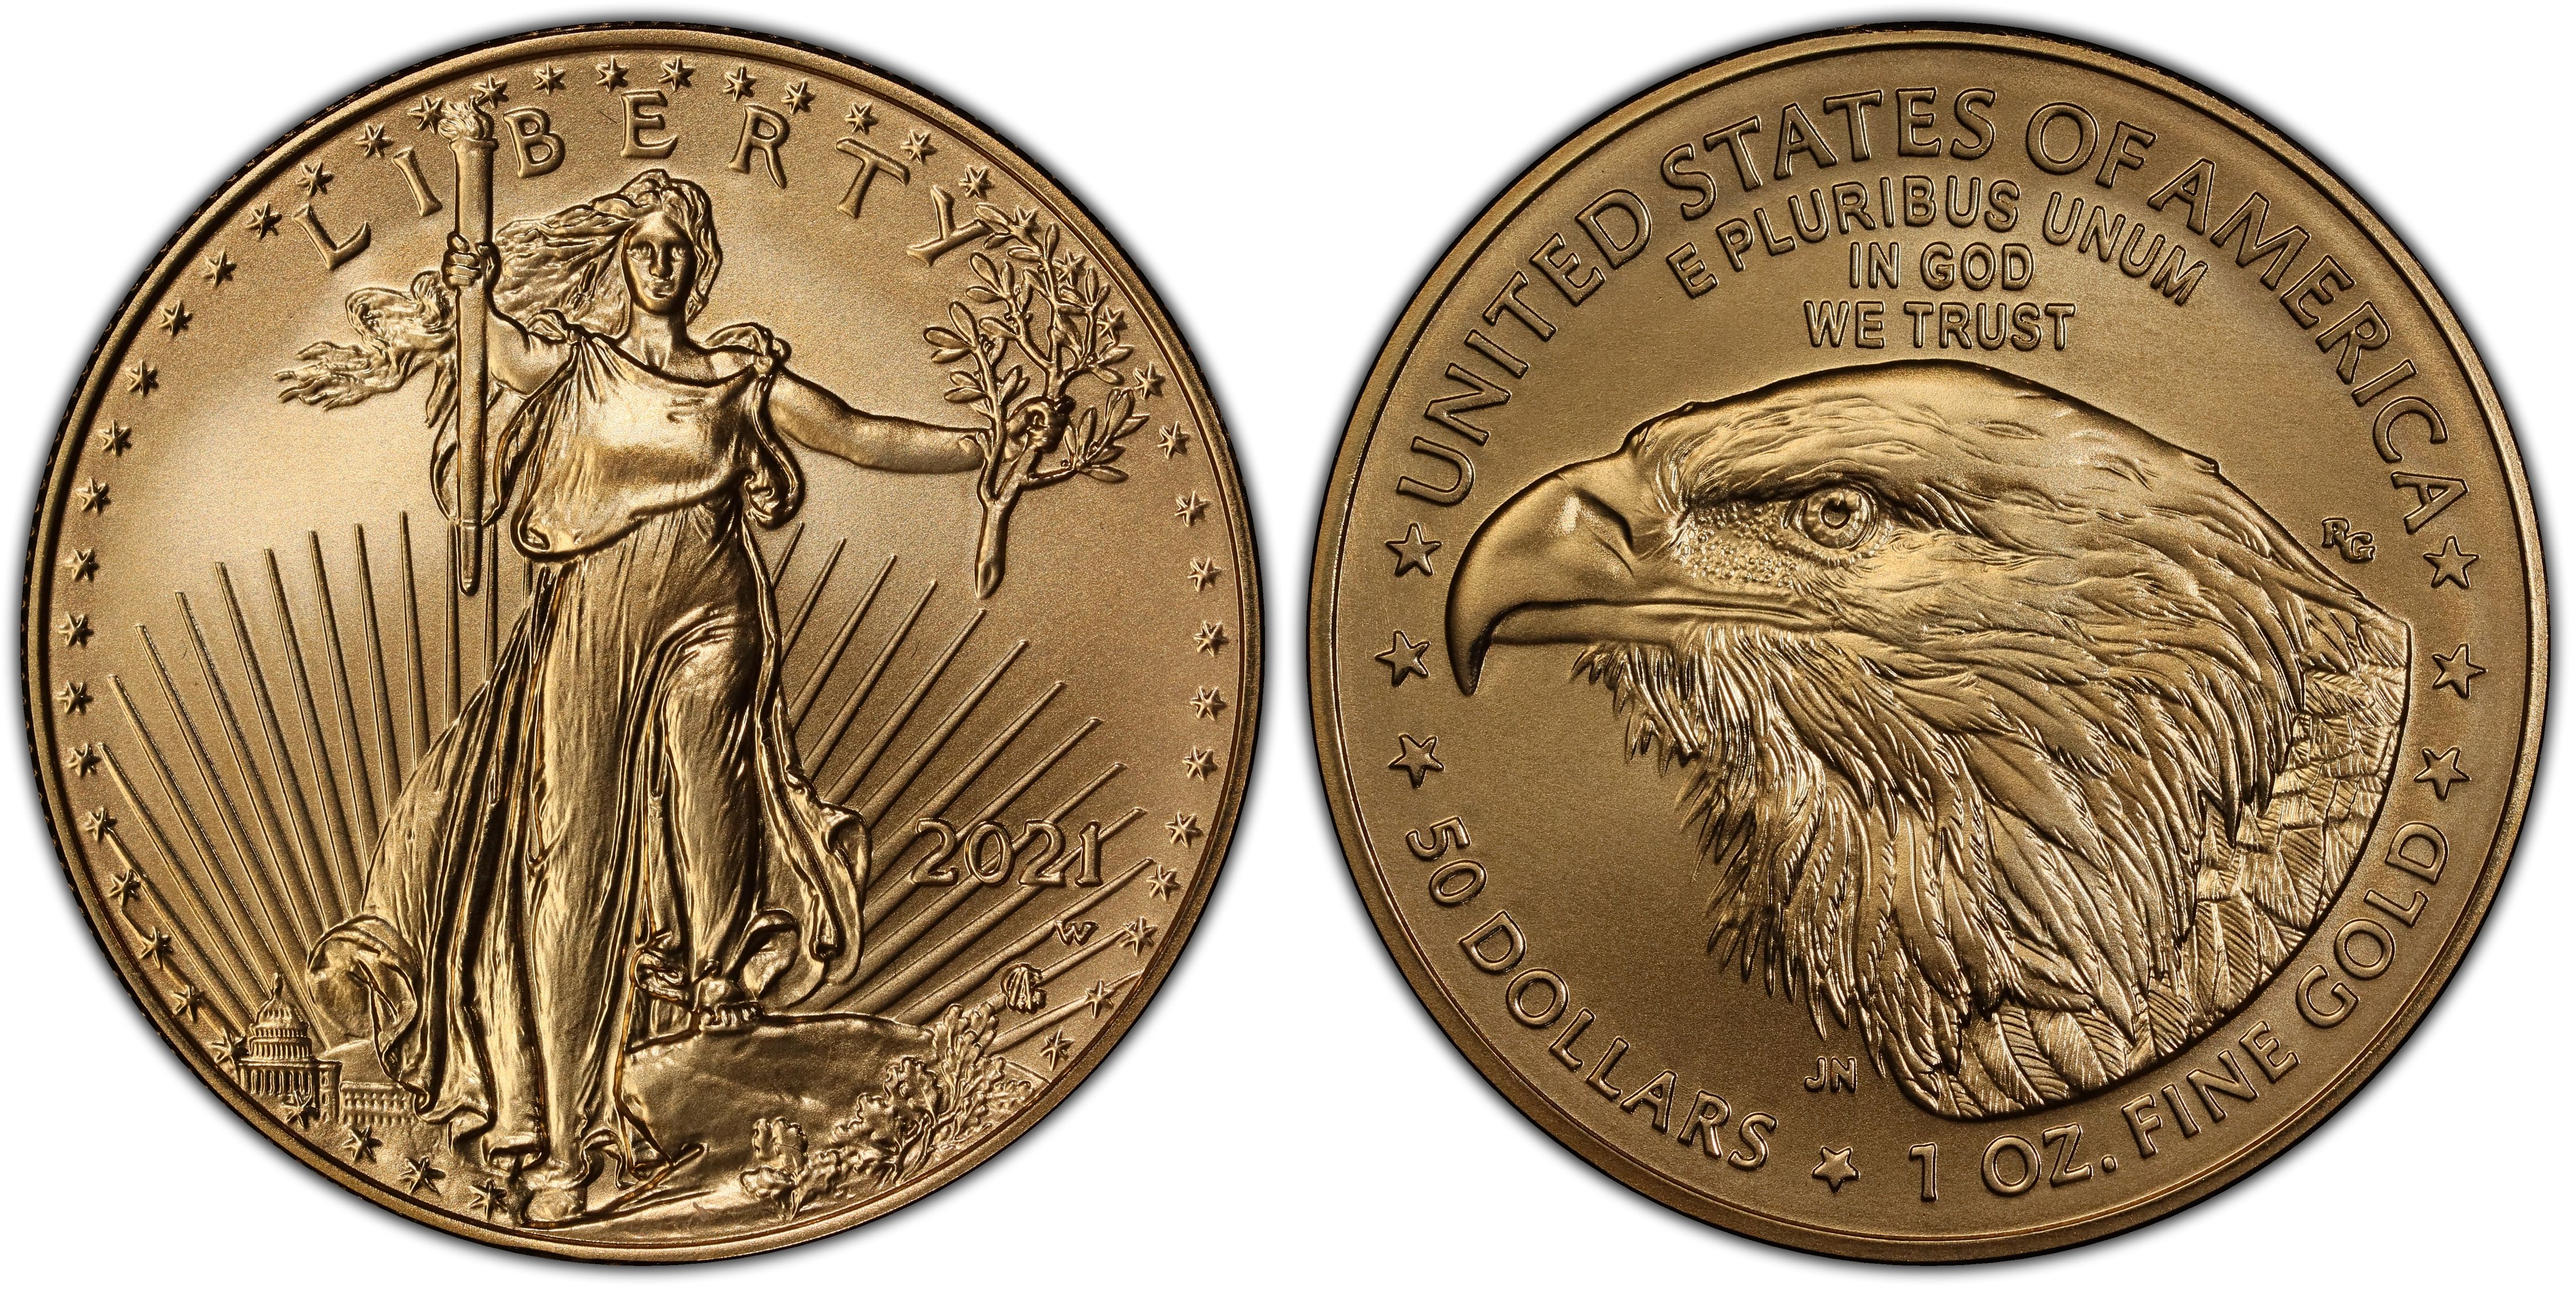 2021-W $50 Burnished Gold Eagle - Type 2 (Special Strike) Gold